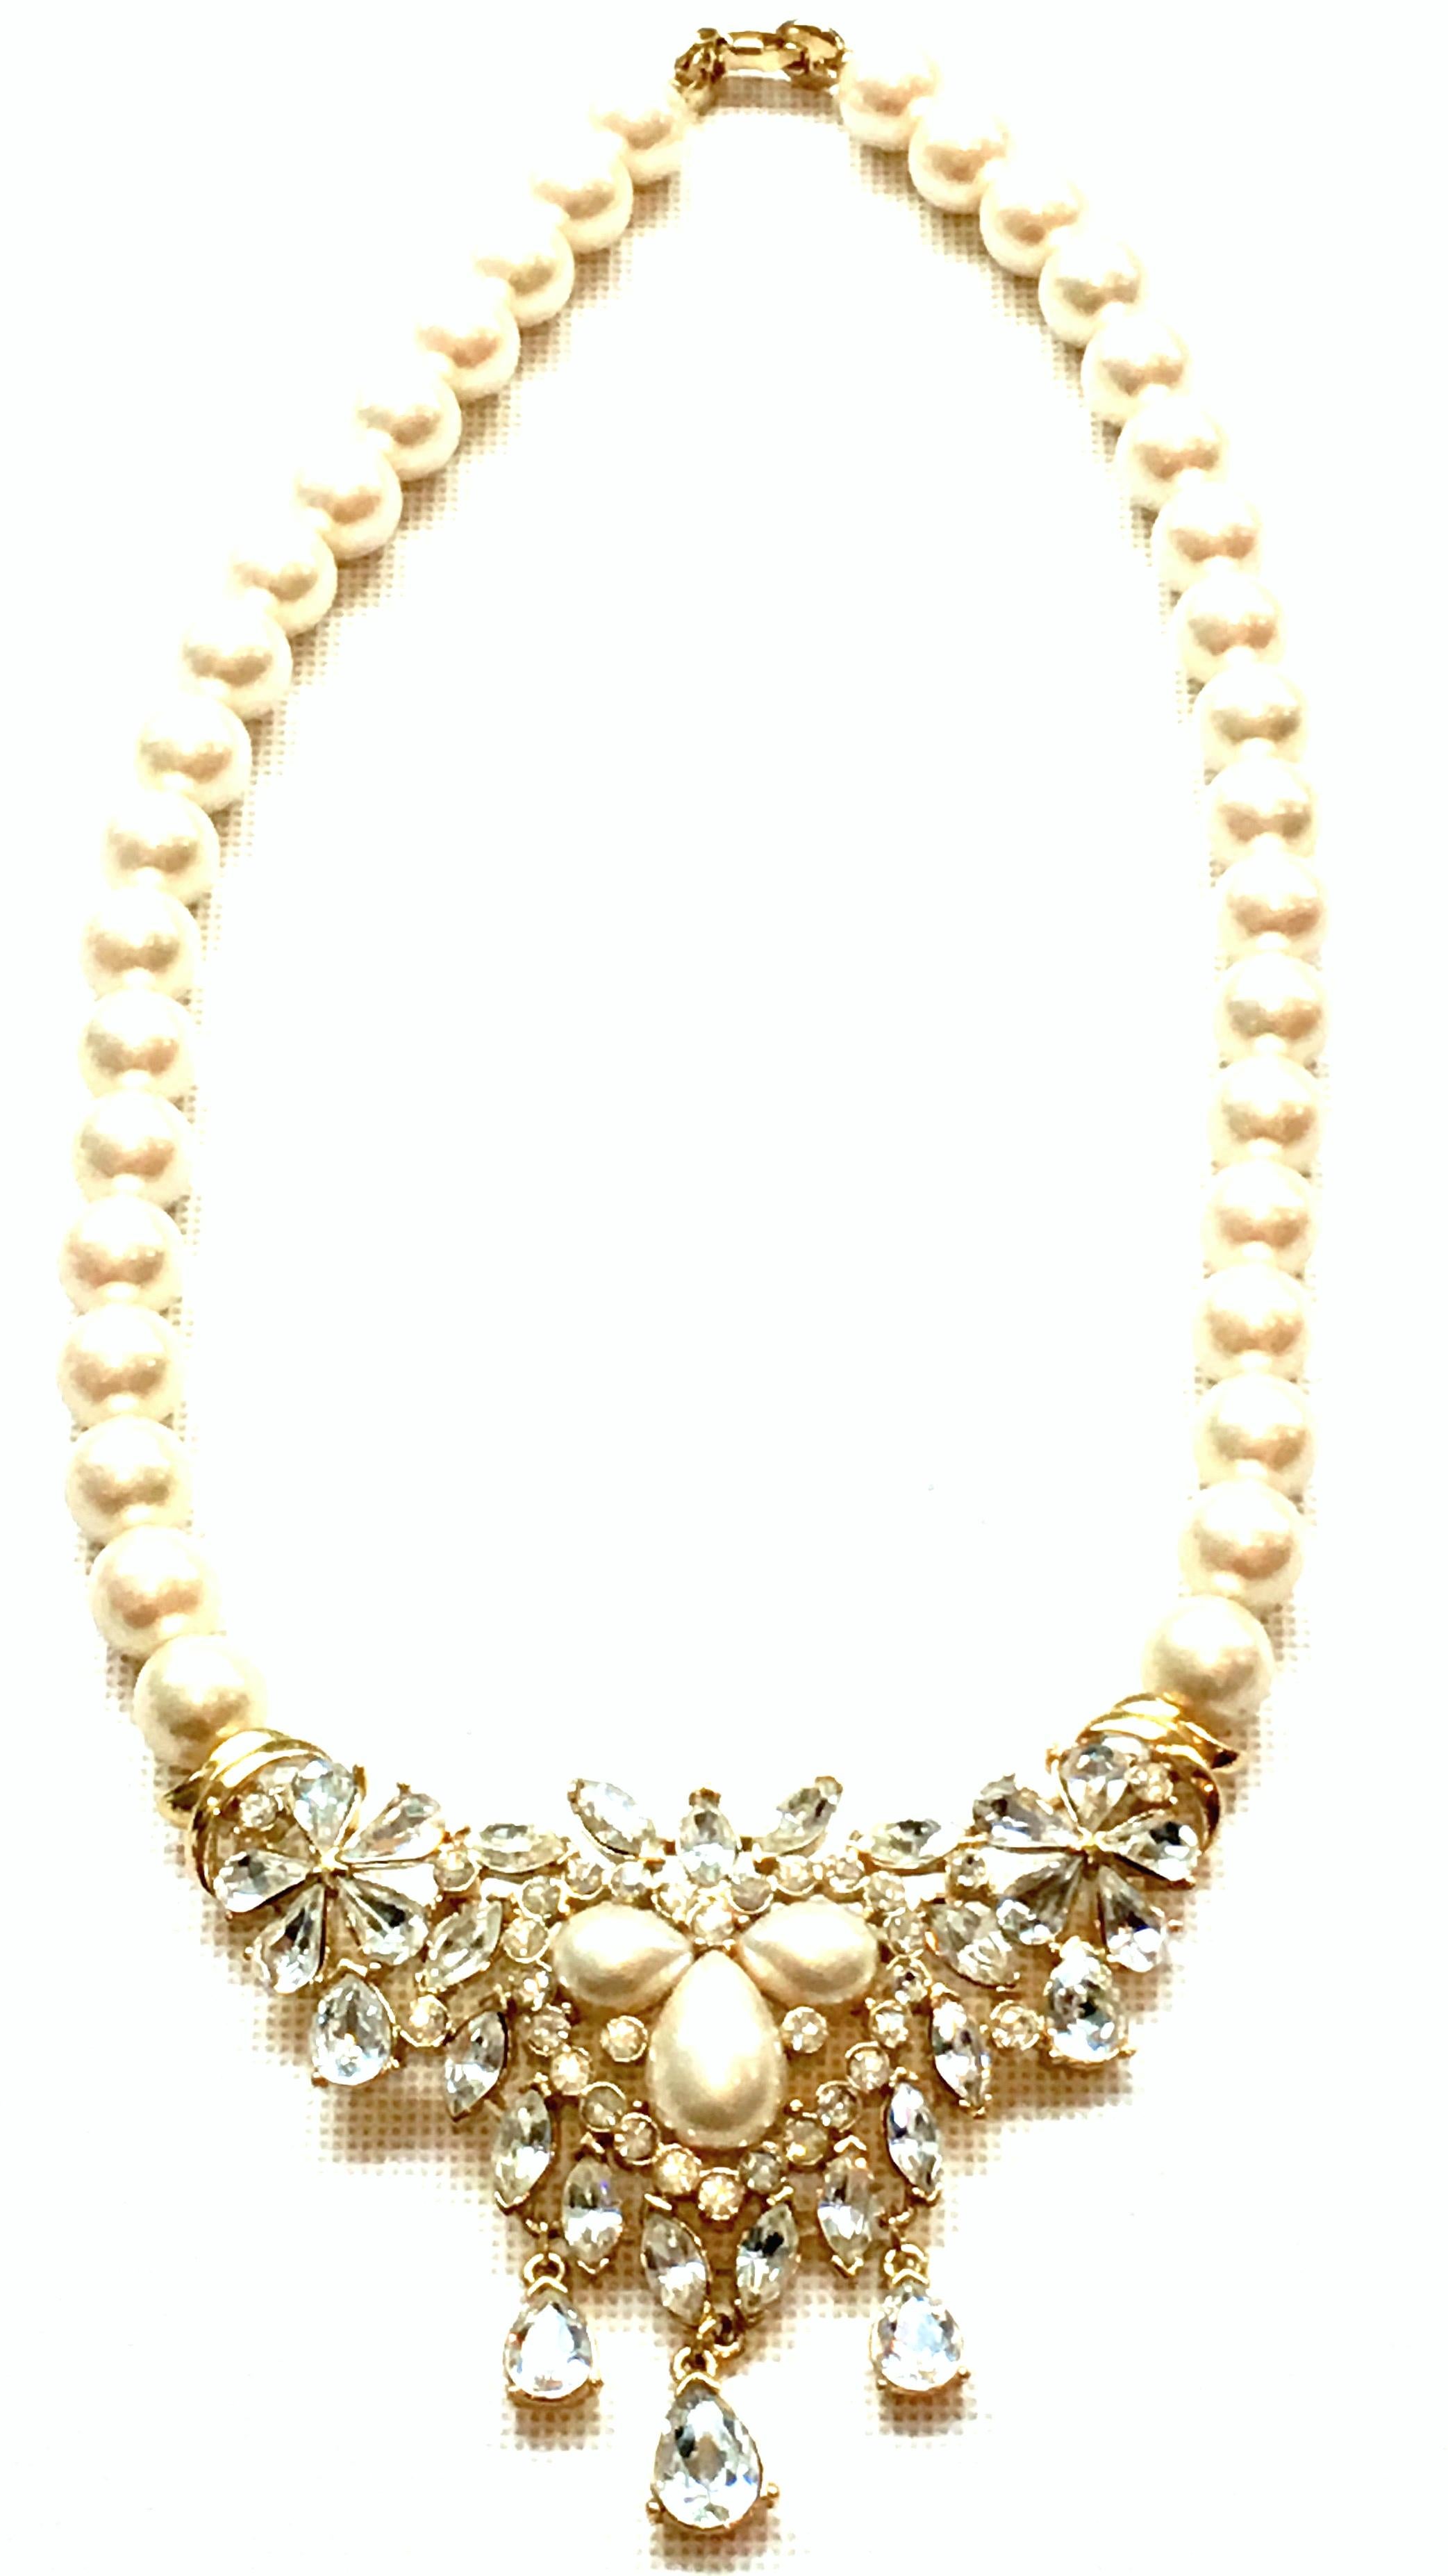 20th Century Gold Plate Austrian Crystal & Faux Pearl Bead Necklace By Kunio Matsumoto For Trifari. Finely crafted of gold plate, off white faux pearl beads, brilliant cut and faceted colorless fancy prong set Austrian Crystal stones this classic,